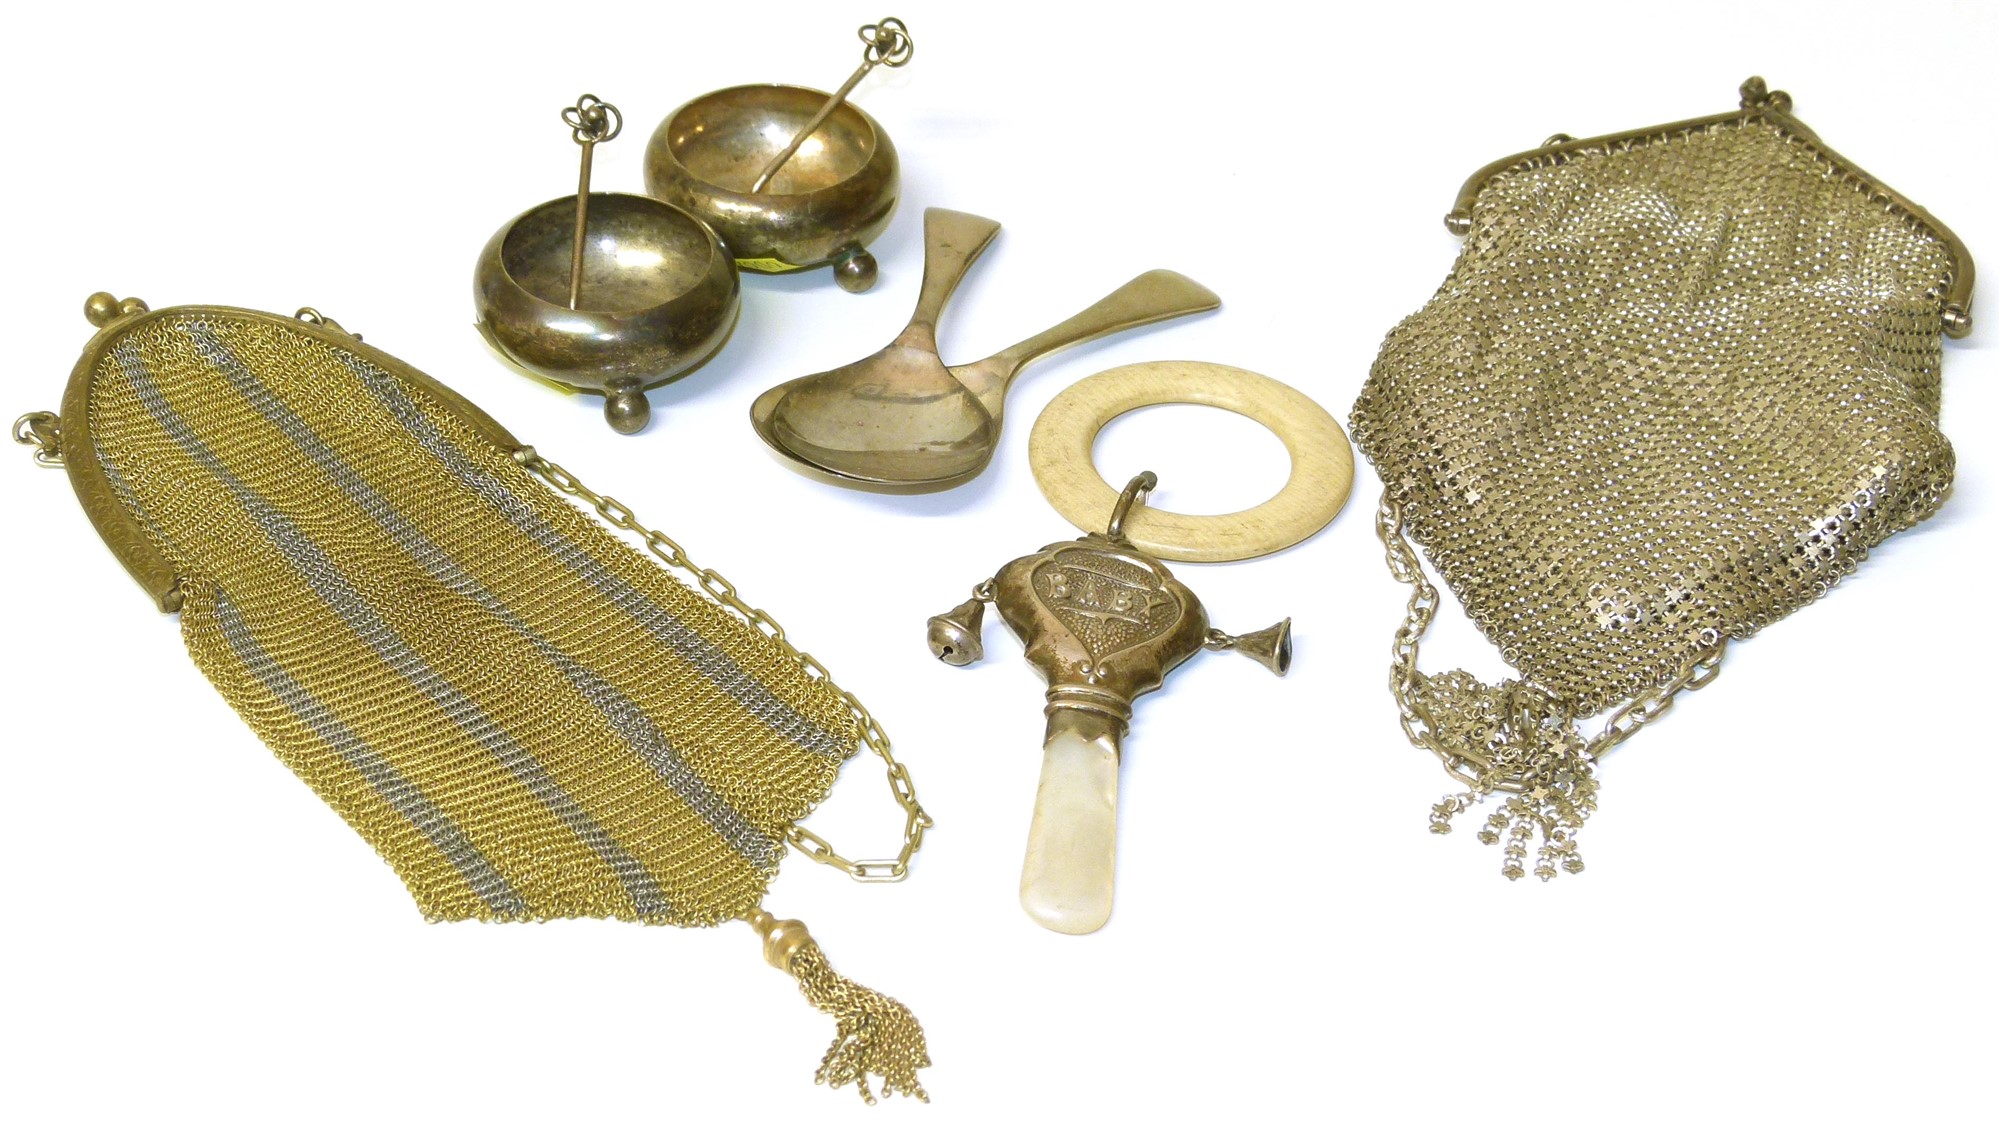 Two evening bags, two open silver salts, two silver caddy spoons and a baby rattle. Condition